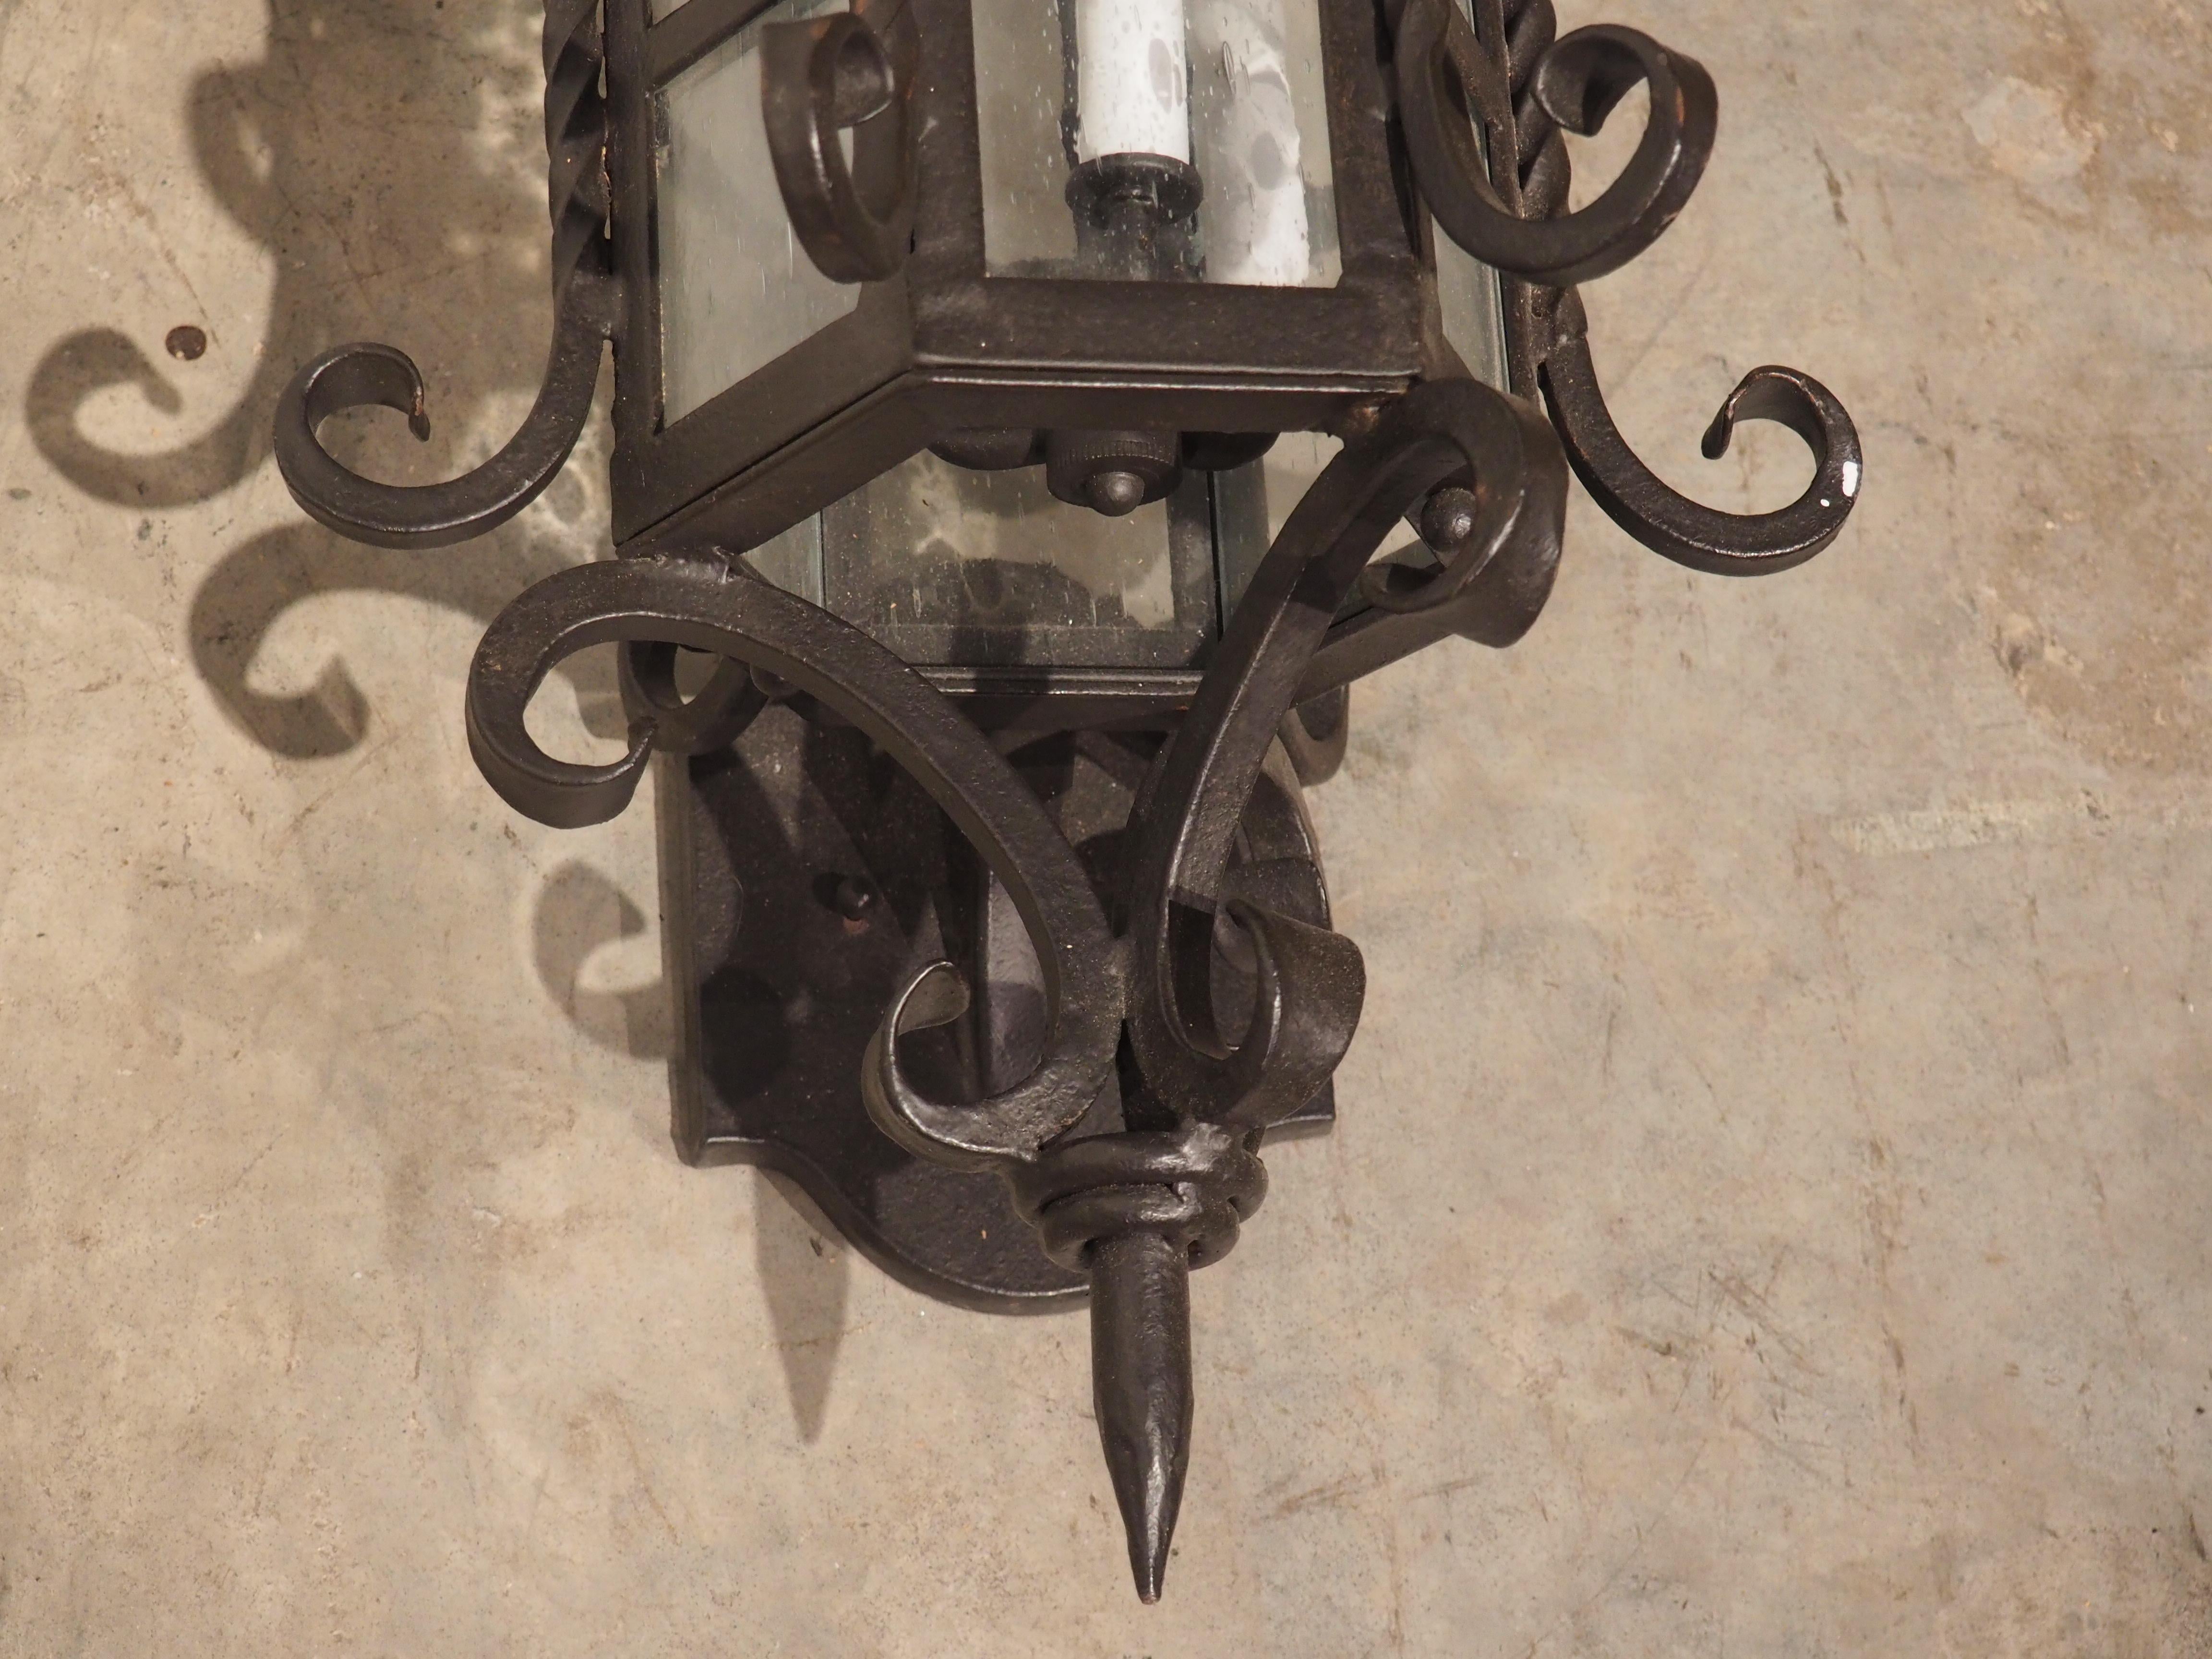 Metal Hexagonal Wrought Iron Lantern with Chained Wall Mount